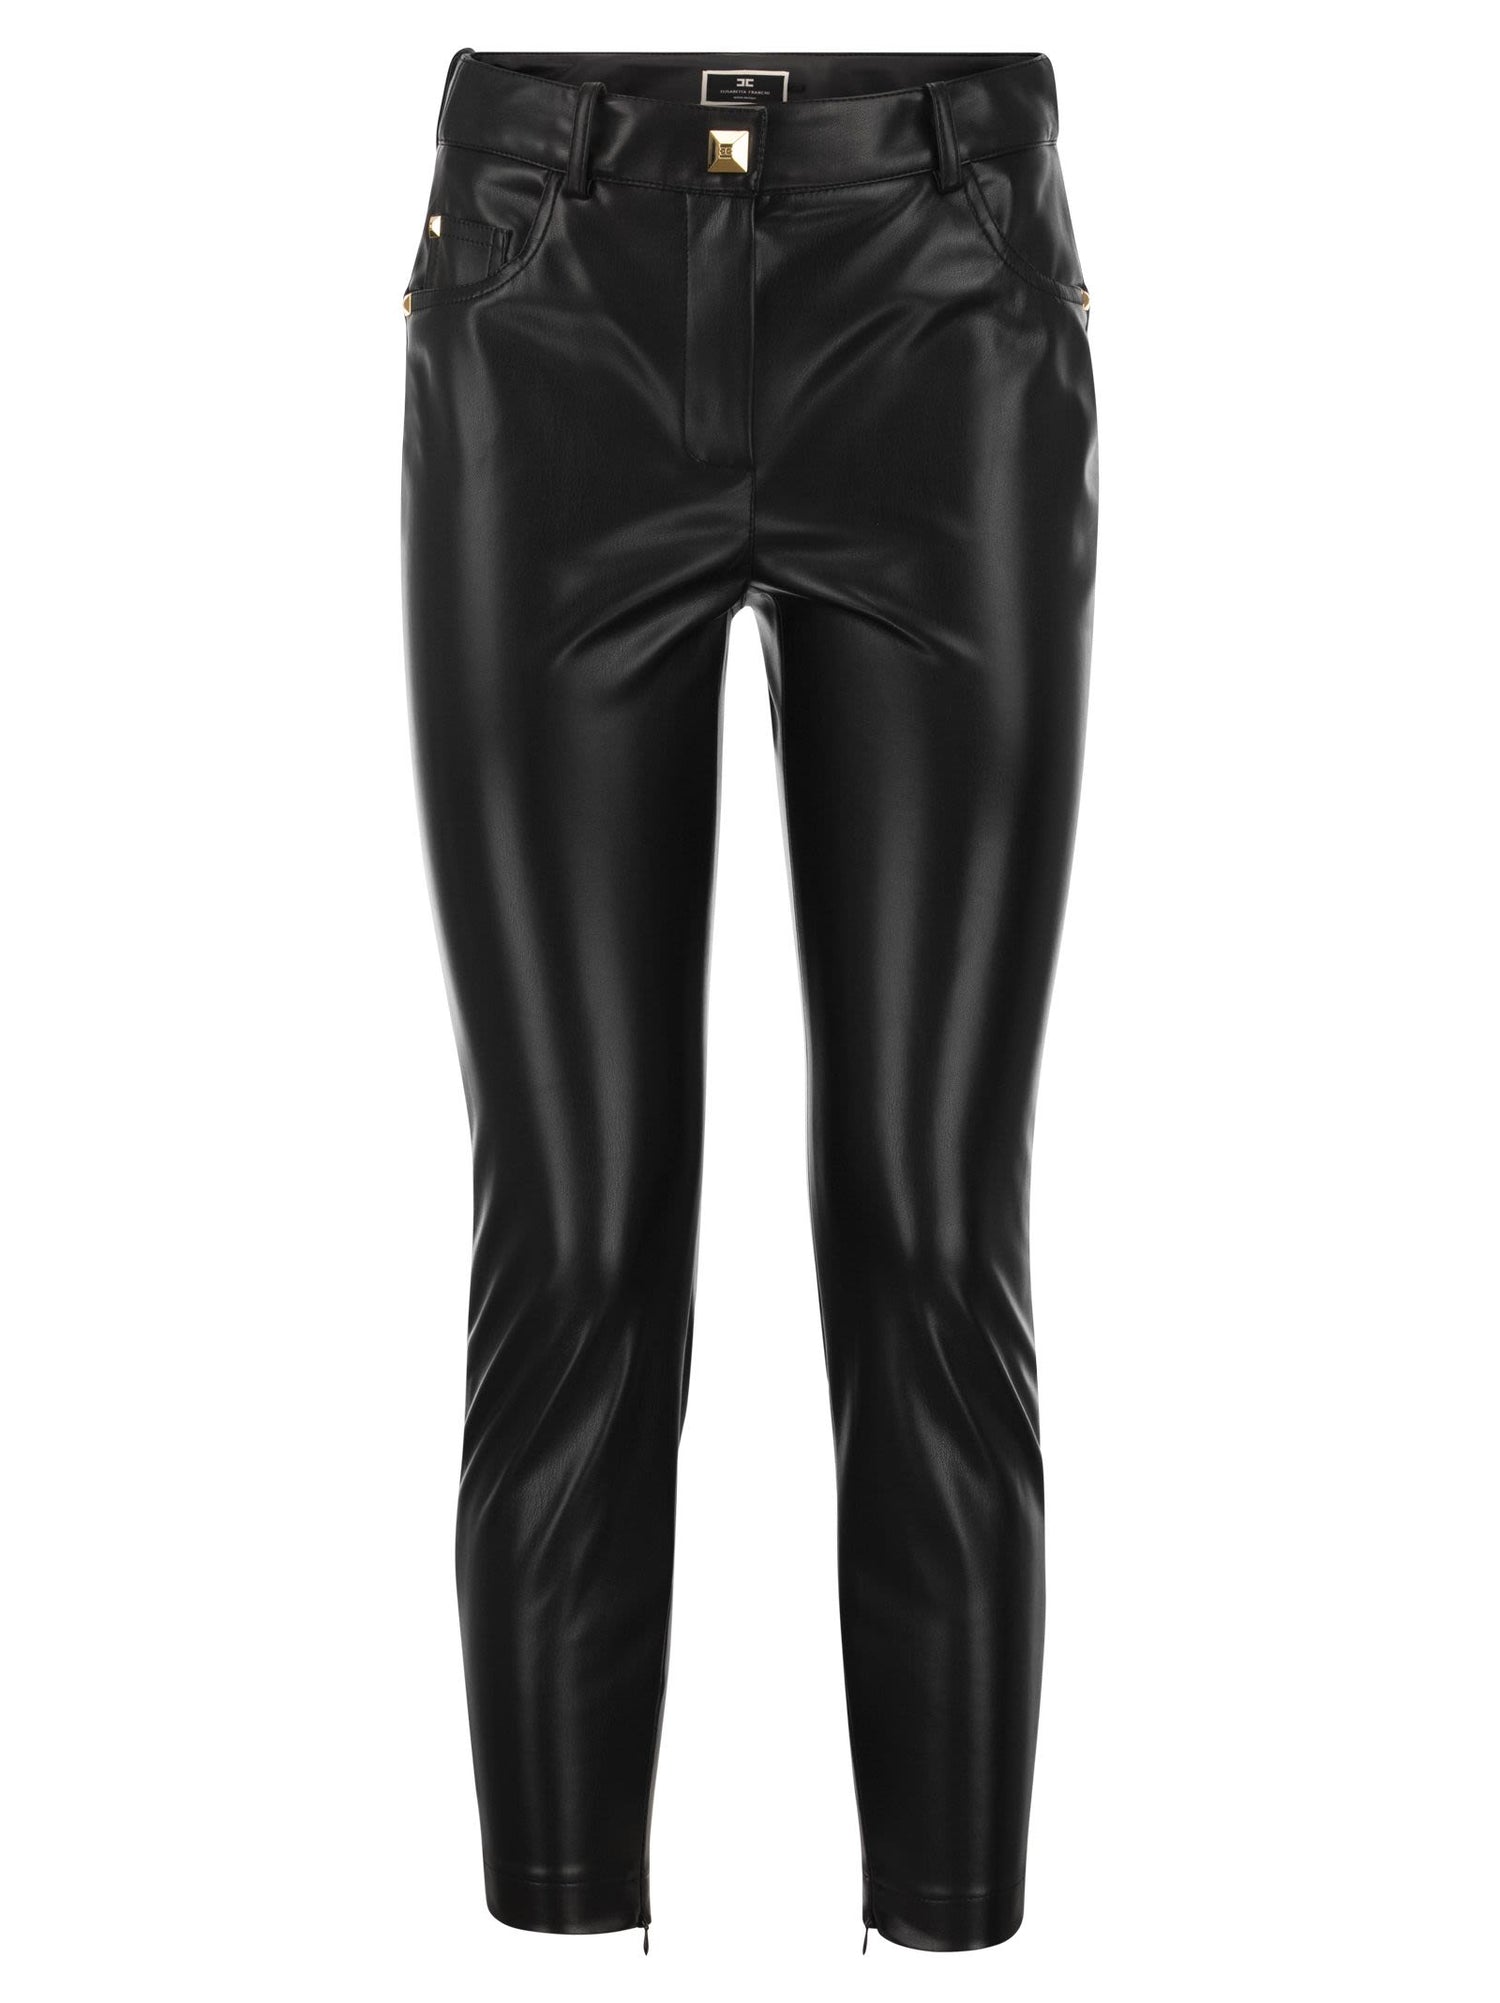 New Winter Spring Men's Skinny Leather Pants Fashion Faux Leather Trousers  for Male Trouser Stage Club Wear Biker Pants (Color : 3165, Size : 29) :  Amazon.ca: Clothing, Shoes & Accessories